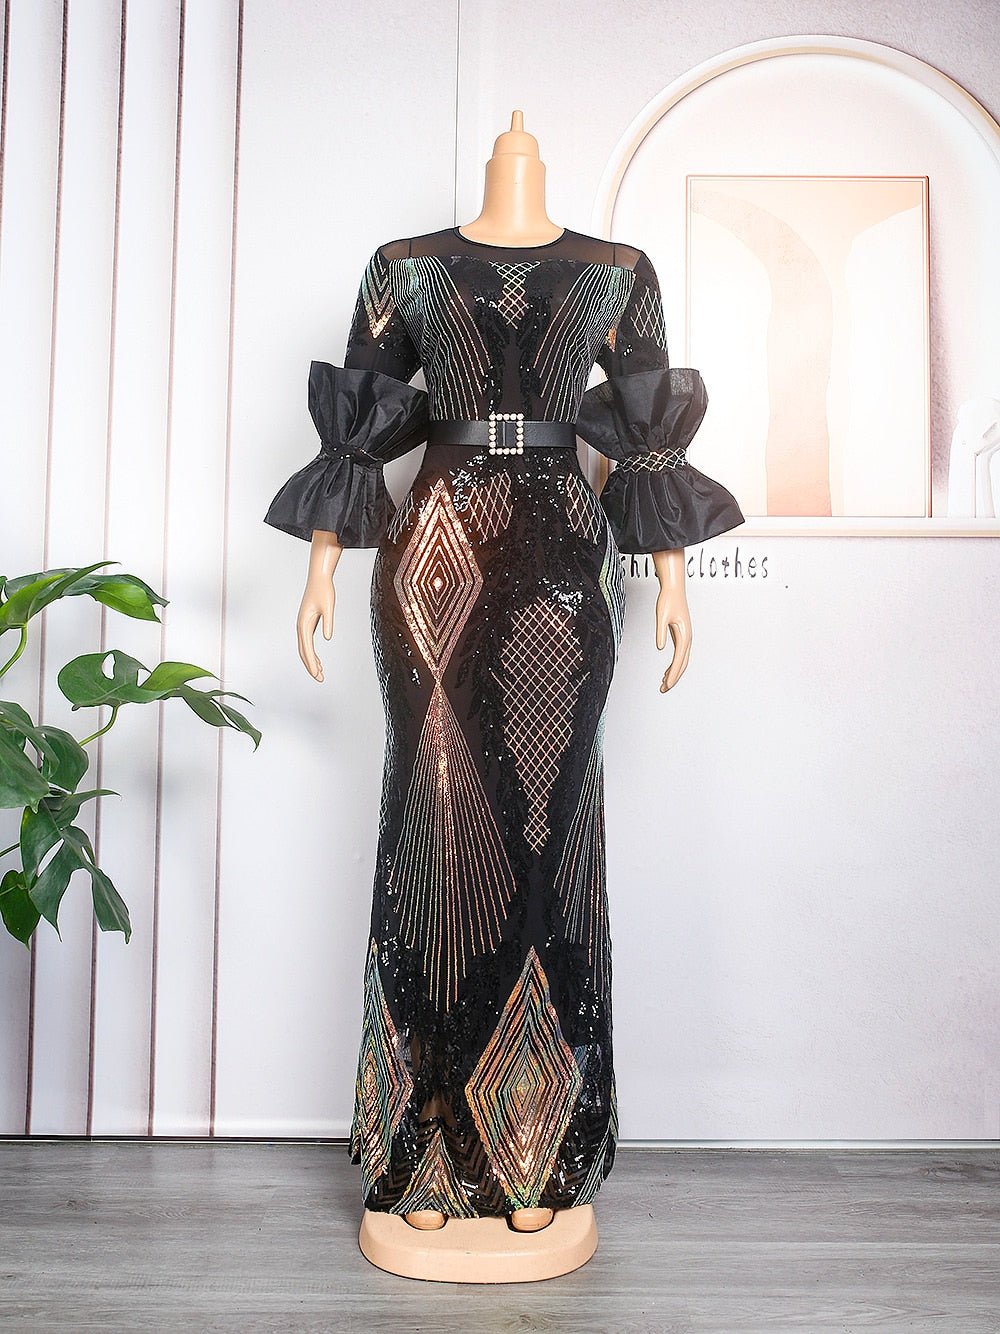 Plus Size Evening Dresses Women Long Dress Robe Elegant Gown Clothes - Flexi Africa - Flexi Africa offers Free Delivery Worldwide - Vibrant African traditional clothing showcasing bold prints and intricate designs